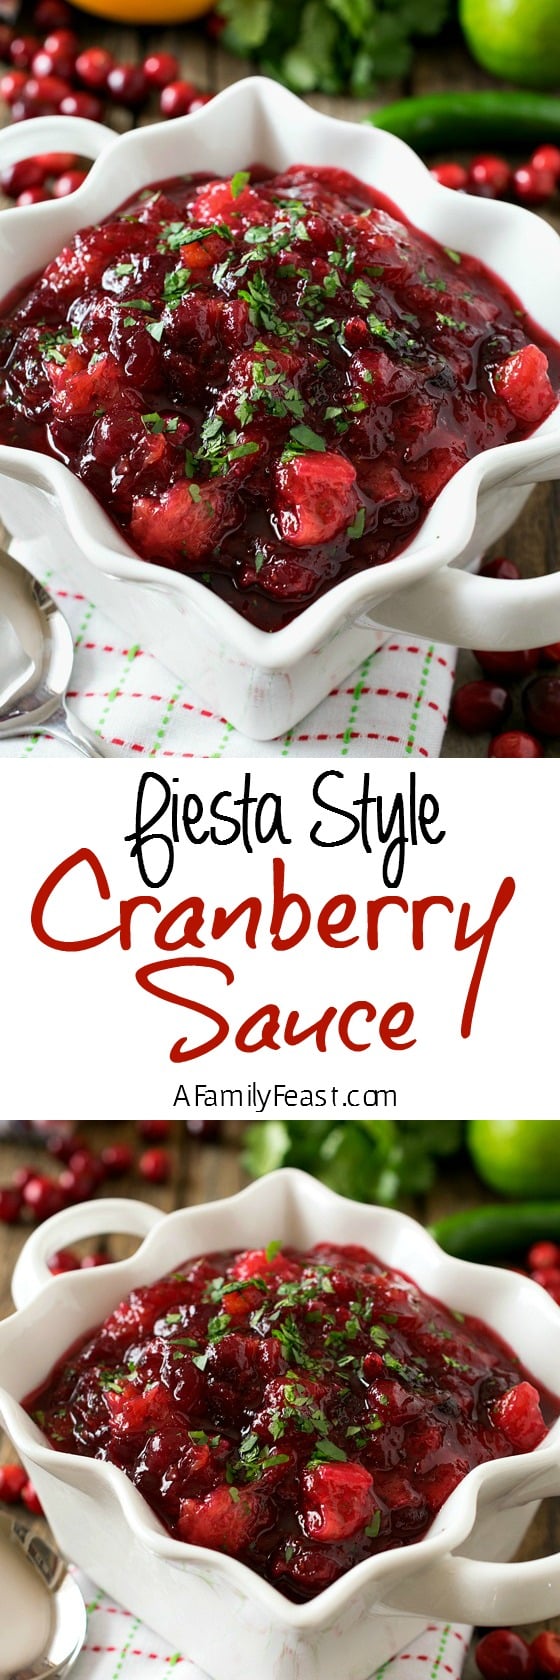 Fiesta Style Cranberry Sauce - An easy cranberry sauce with unexpected and fantastic flavor!